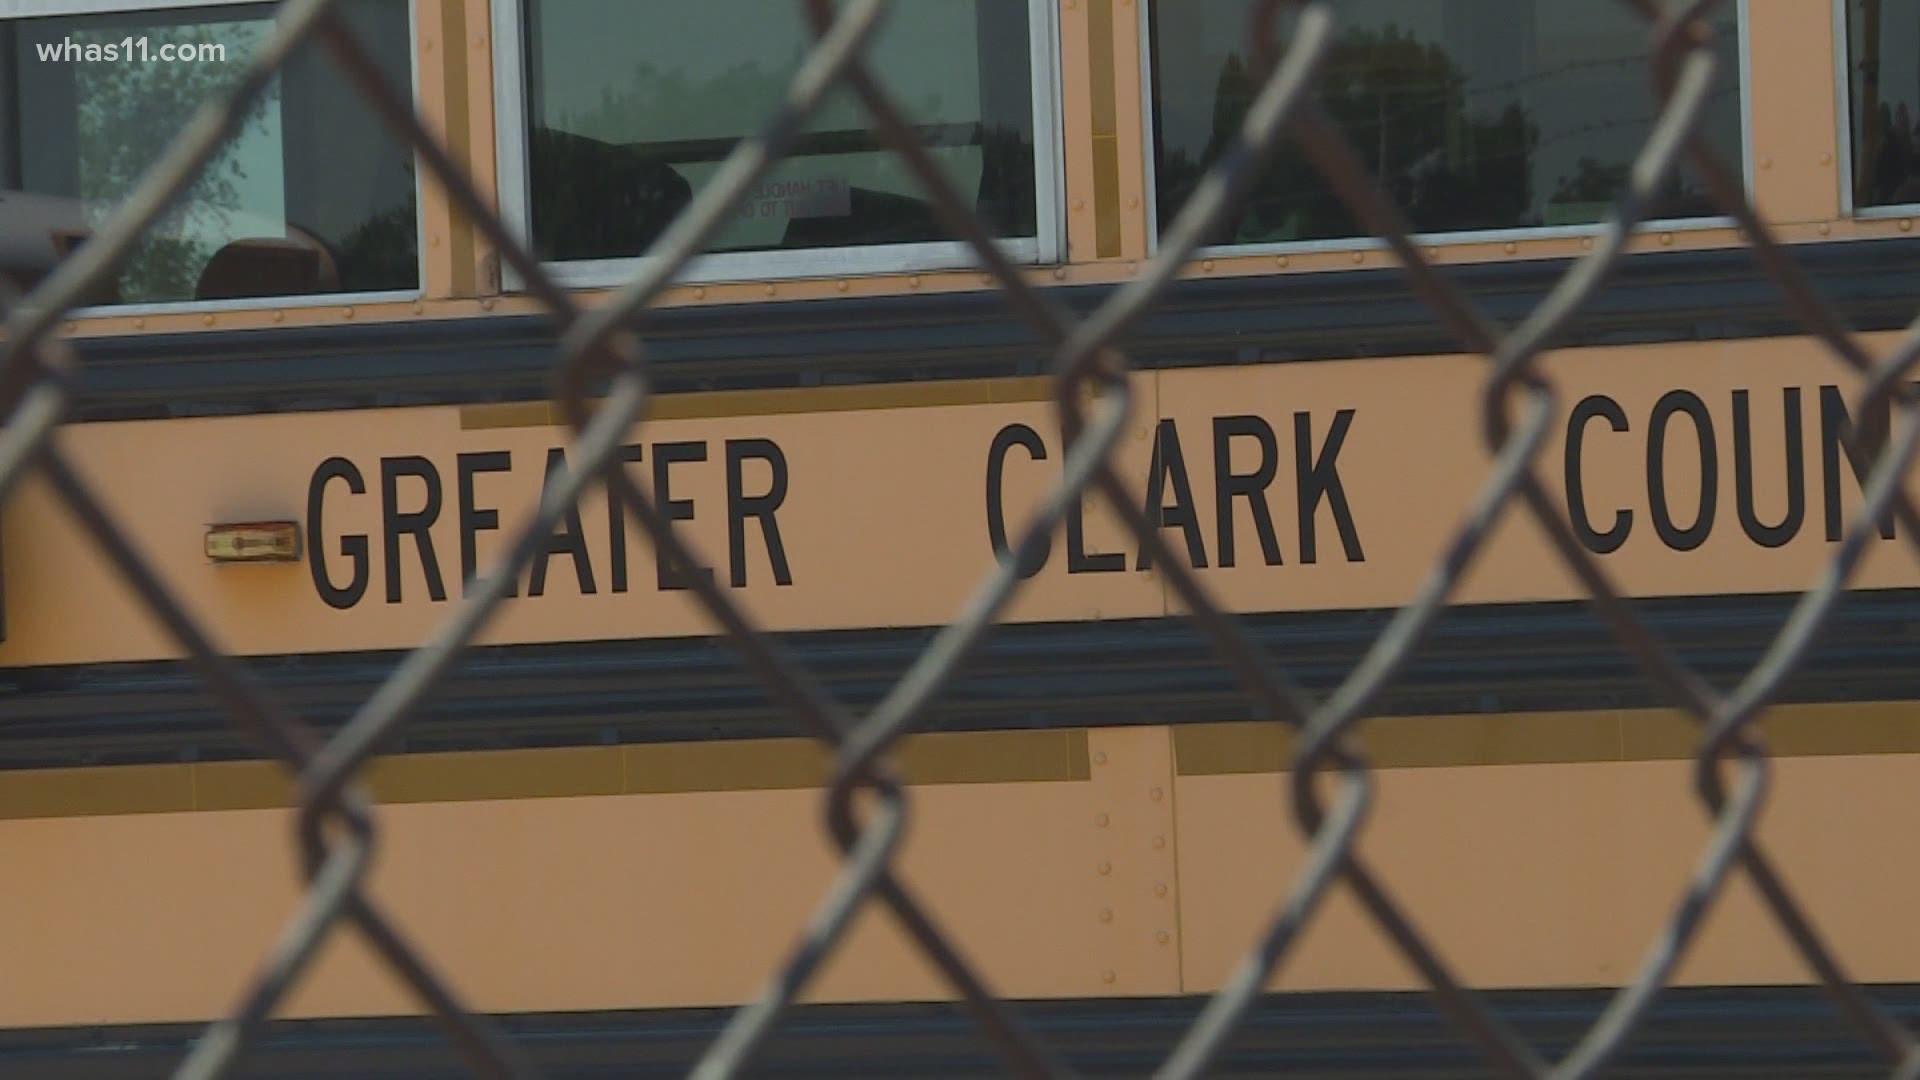 Officials with Greater Clark Schools have approved $5.5 million in budget cuts. Since the approval, an elementary and a alternative school are set to close.